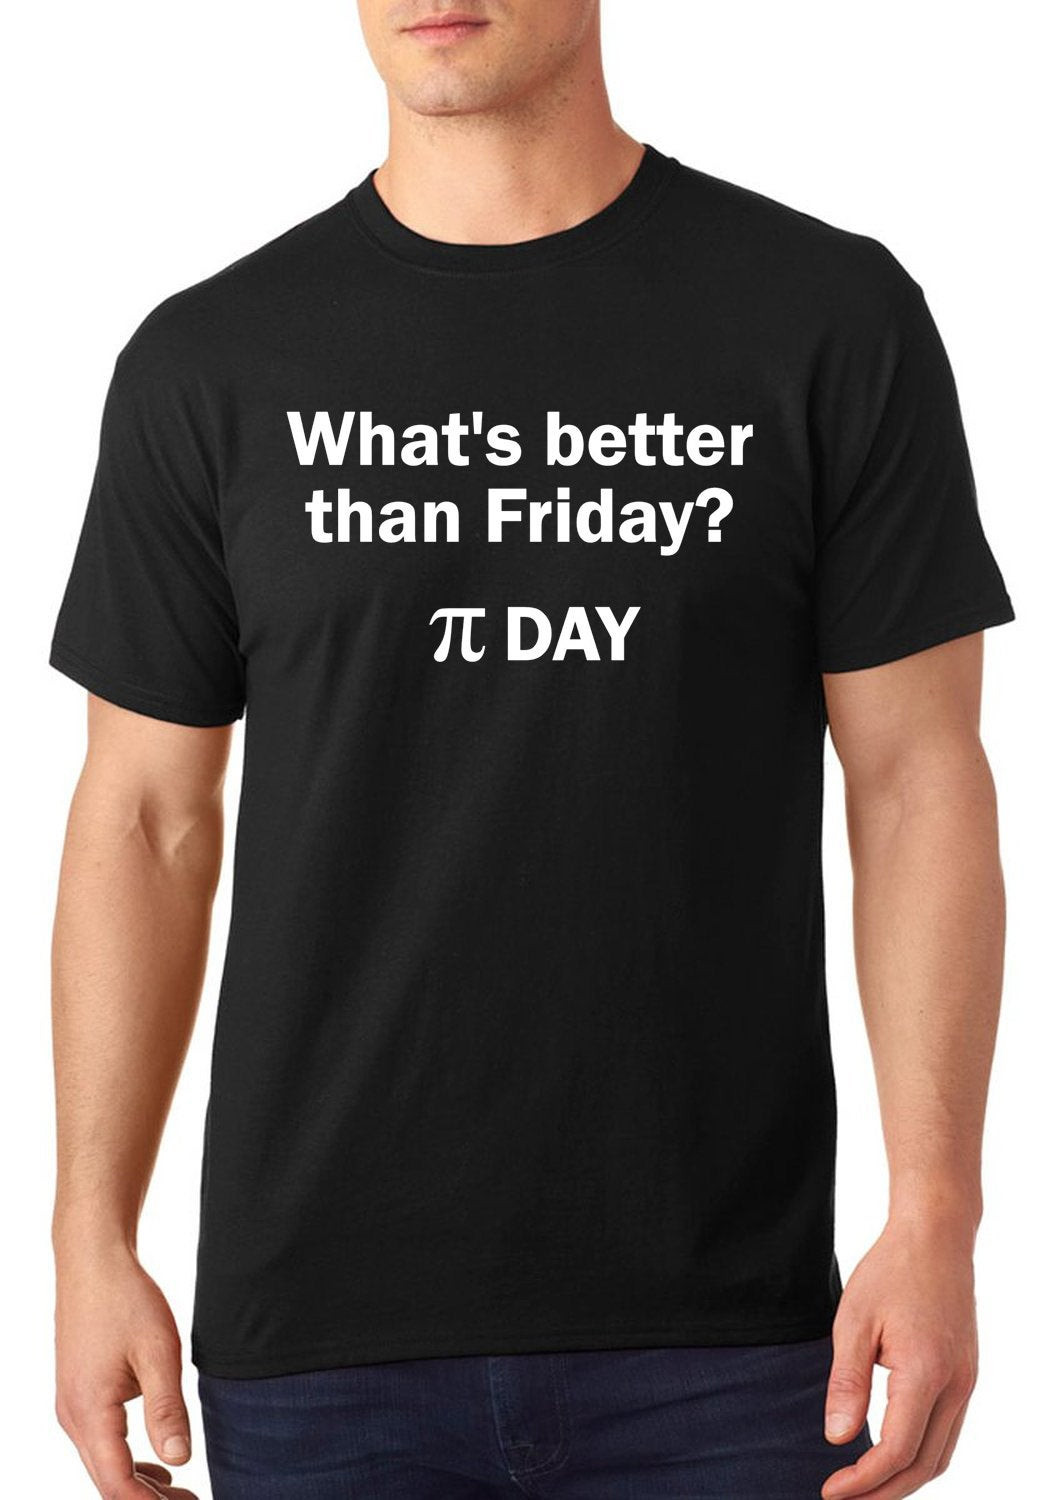 Pi Day Shirts Ideas
 What s better than Friday Pi Day t shirt pi t shirt pi